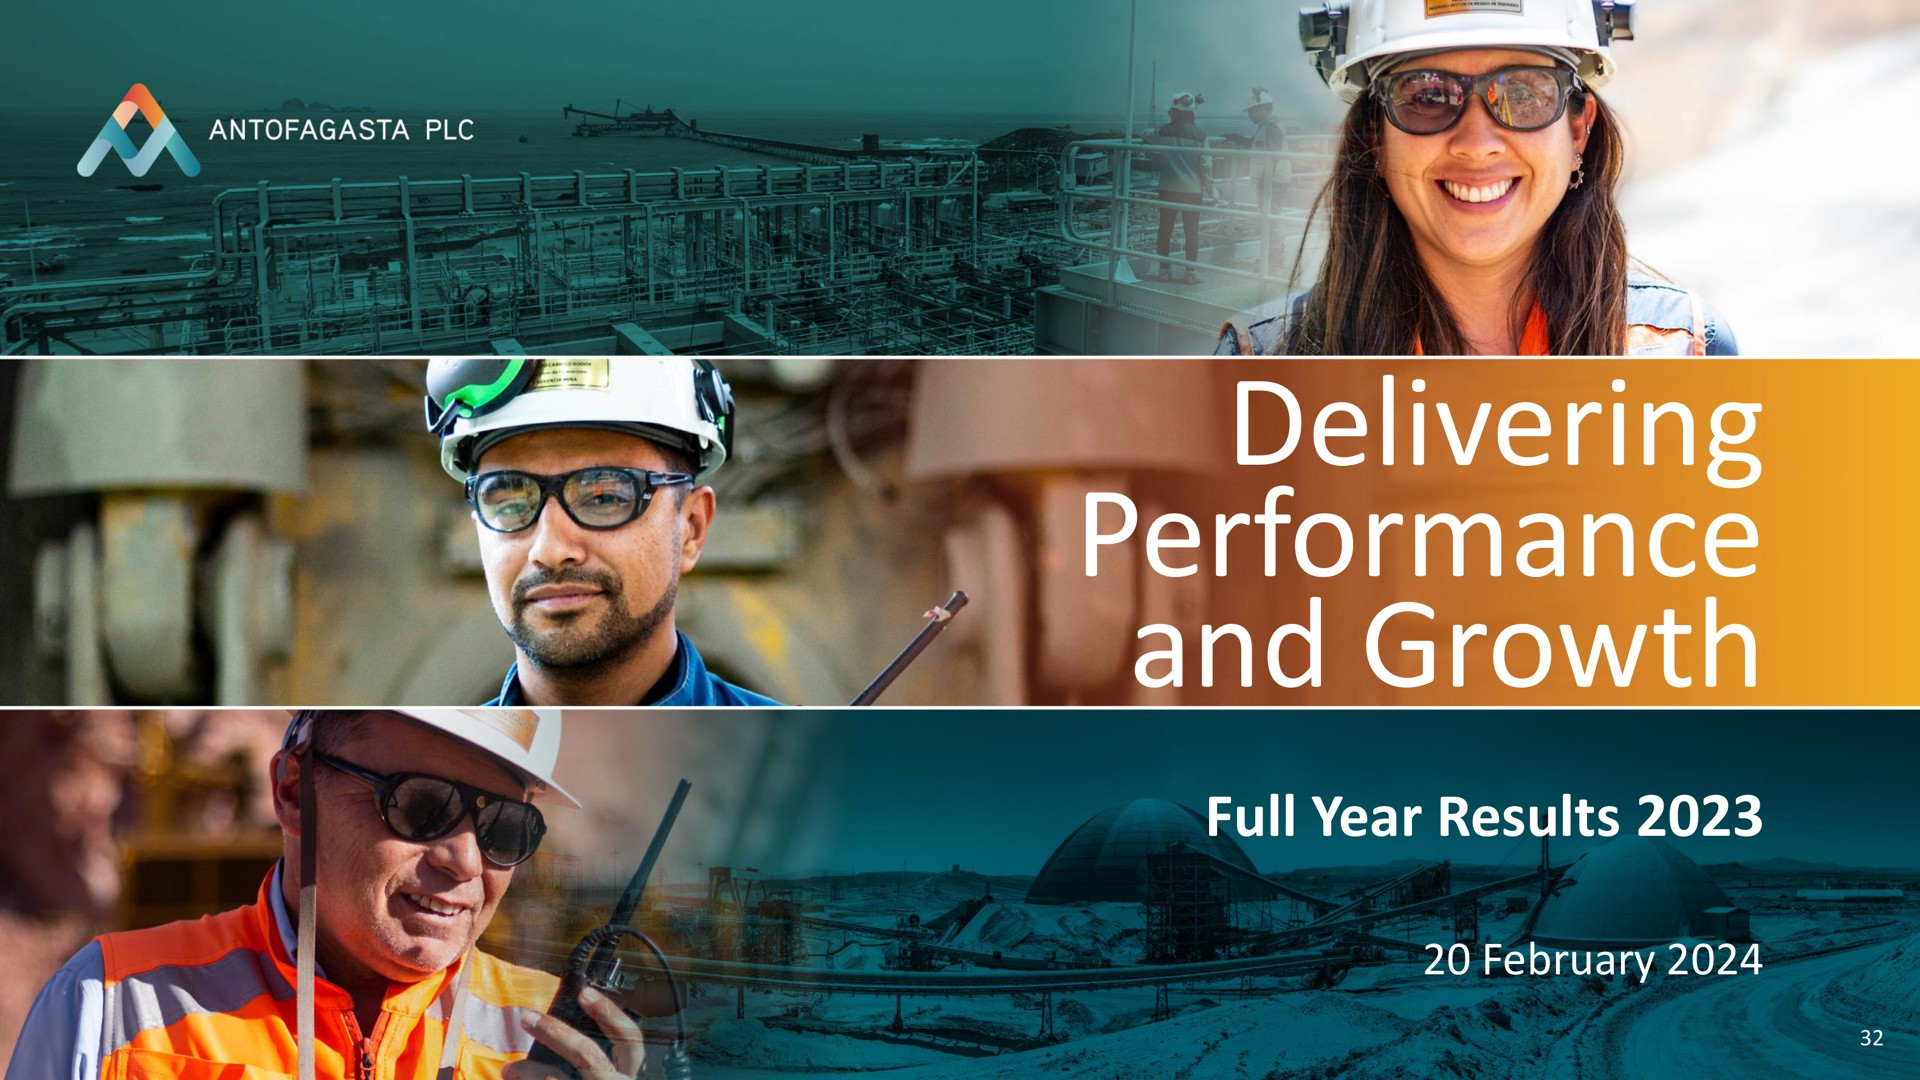 delivering delivering performance performance and growth and growth full year results full year results | Antofagasta